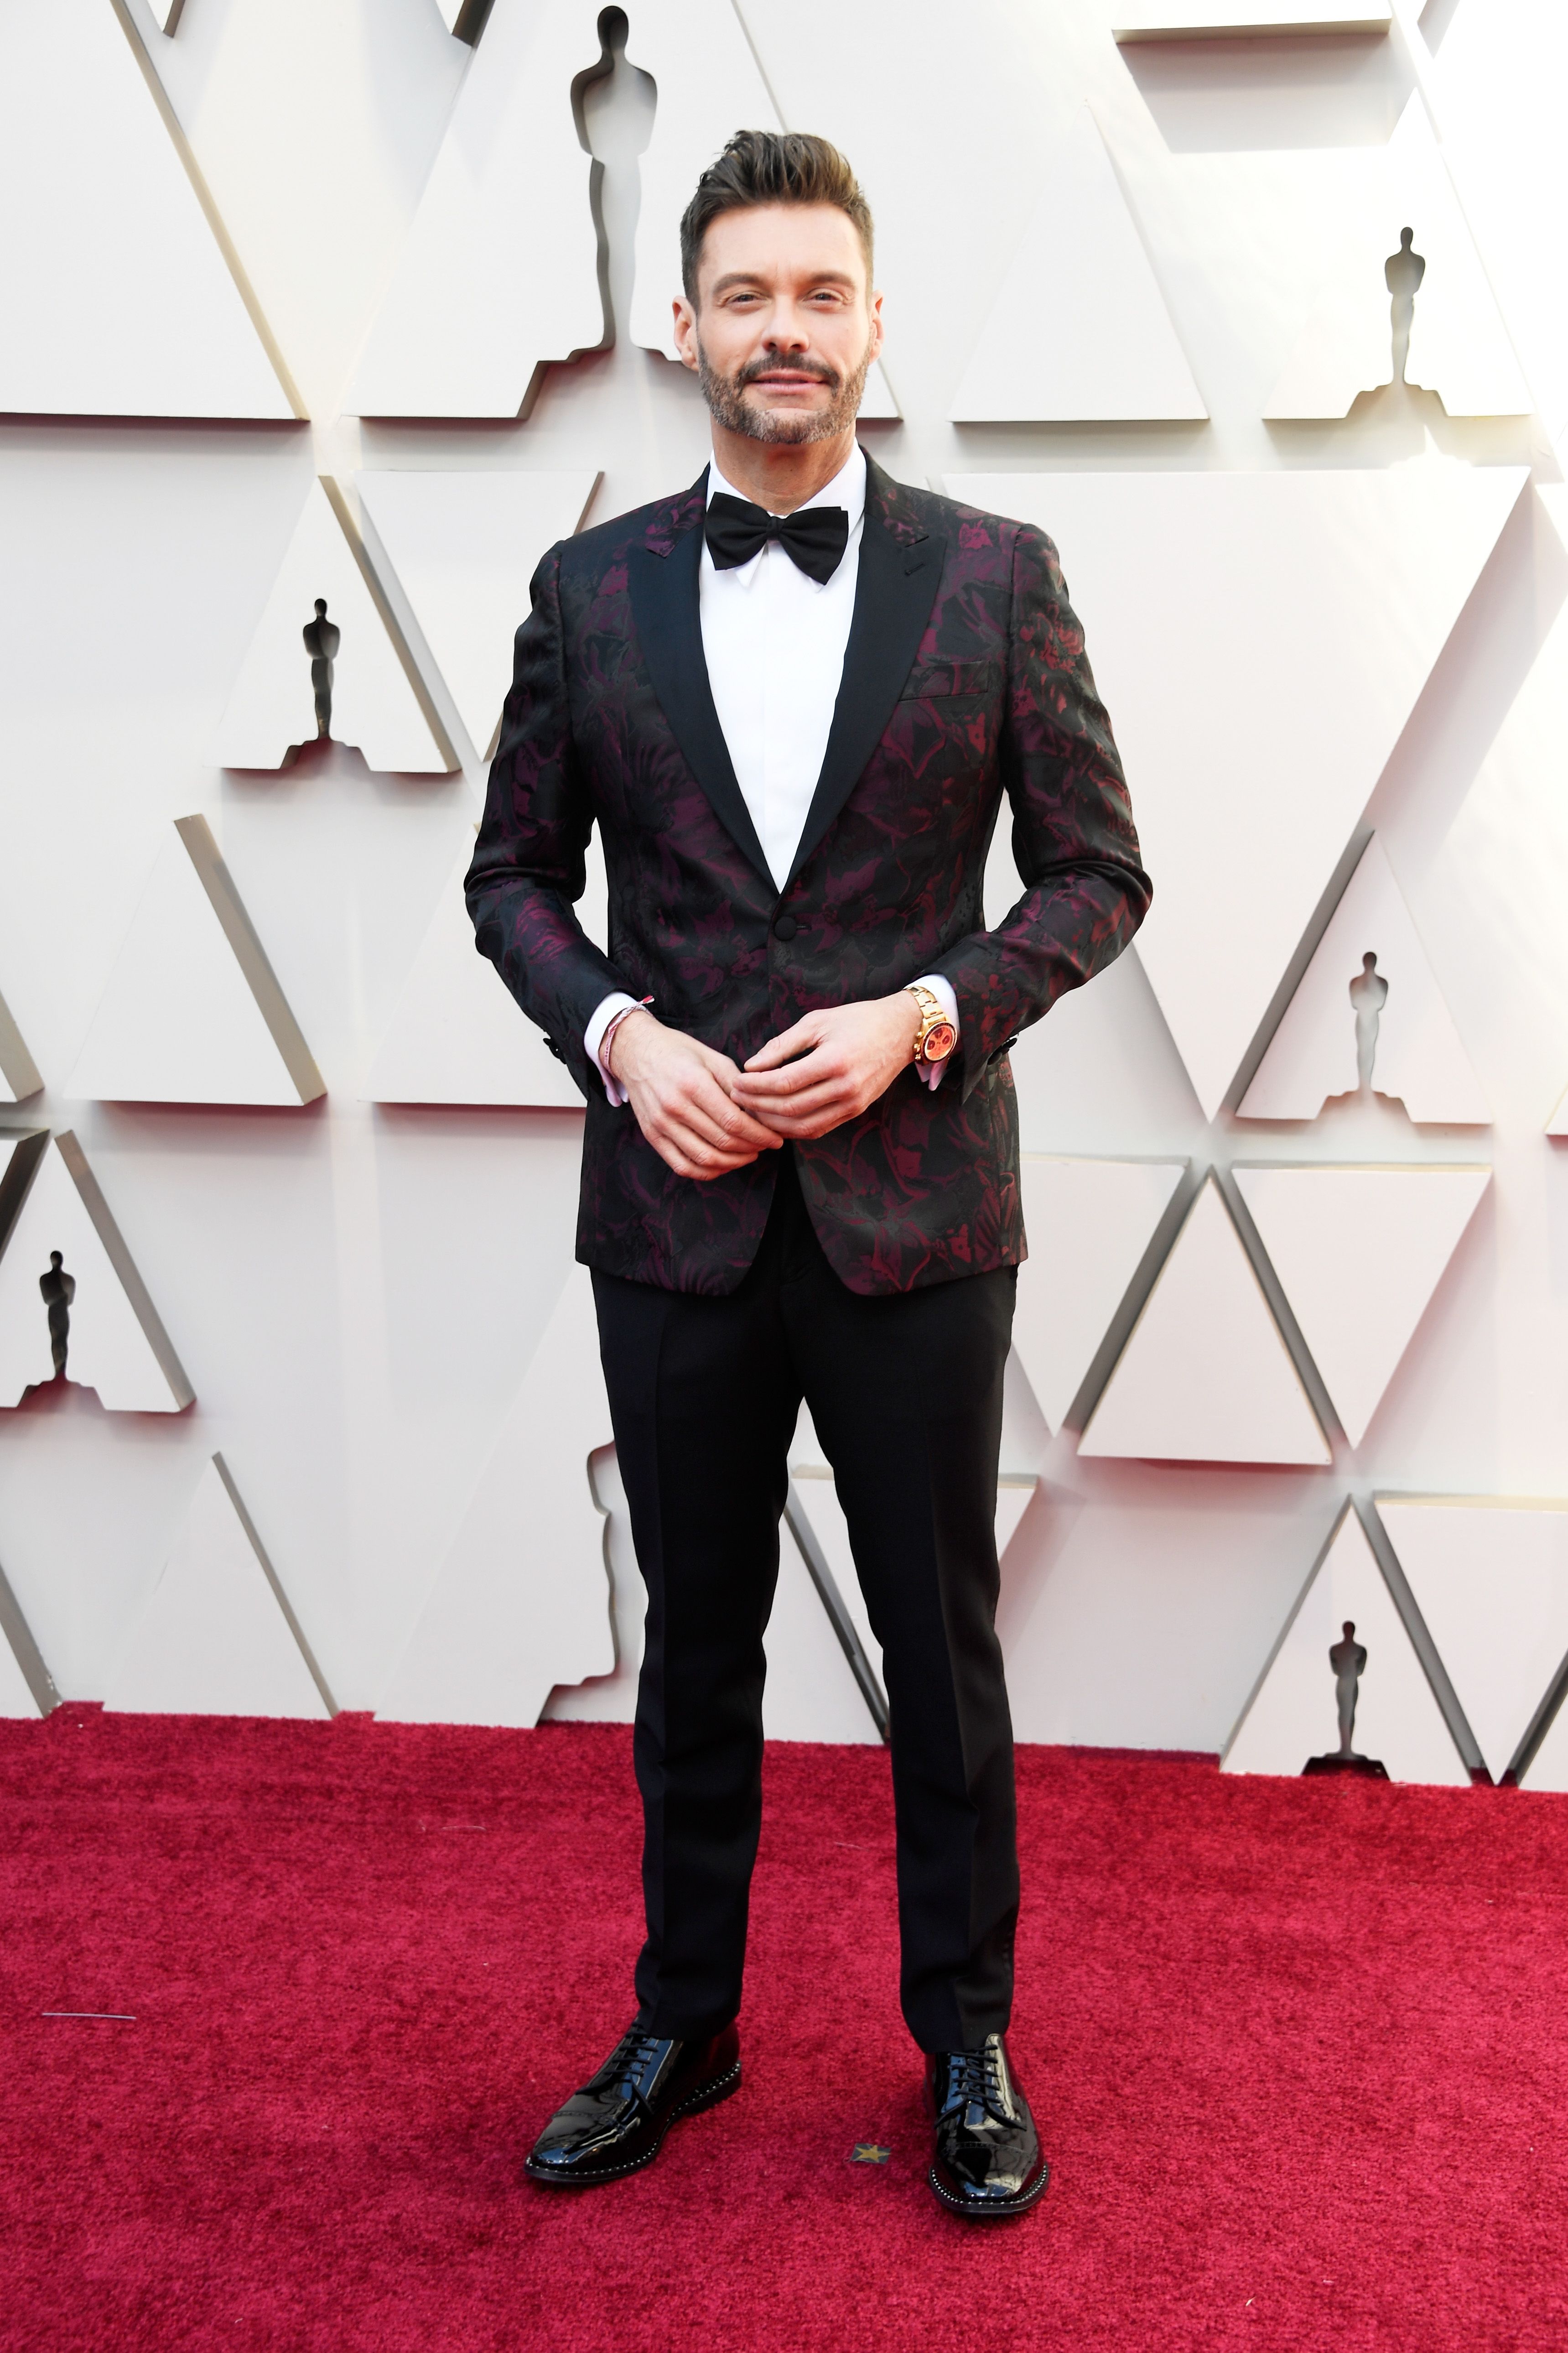 Ryan Seacrest at the 91st Annual Academy Awards at Hollywood and Highland on February 24, 2019. | Source: Getty Images